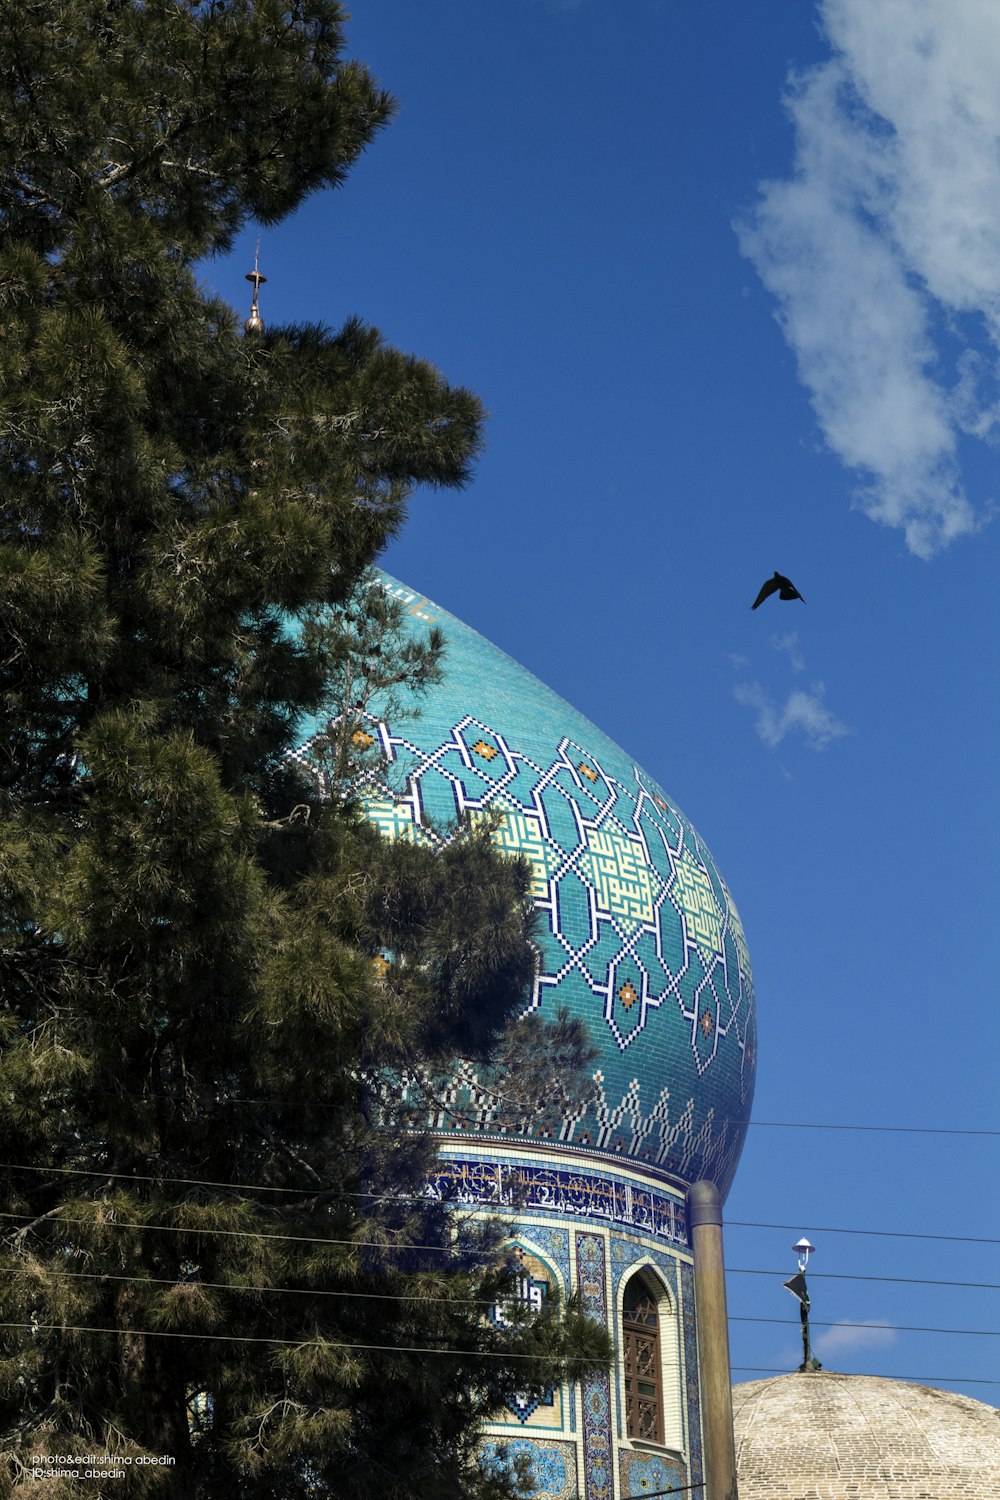 a bird flying over a building with a dome